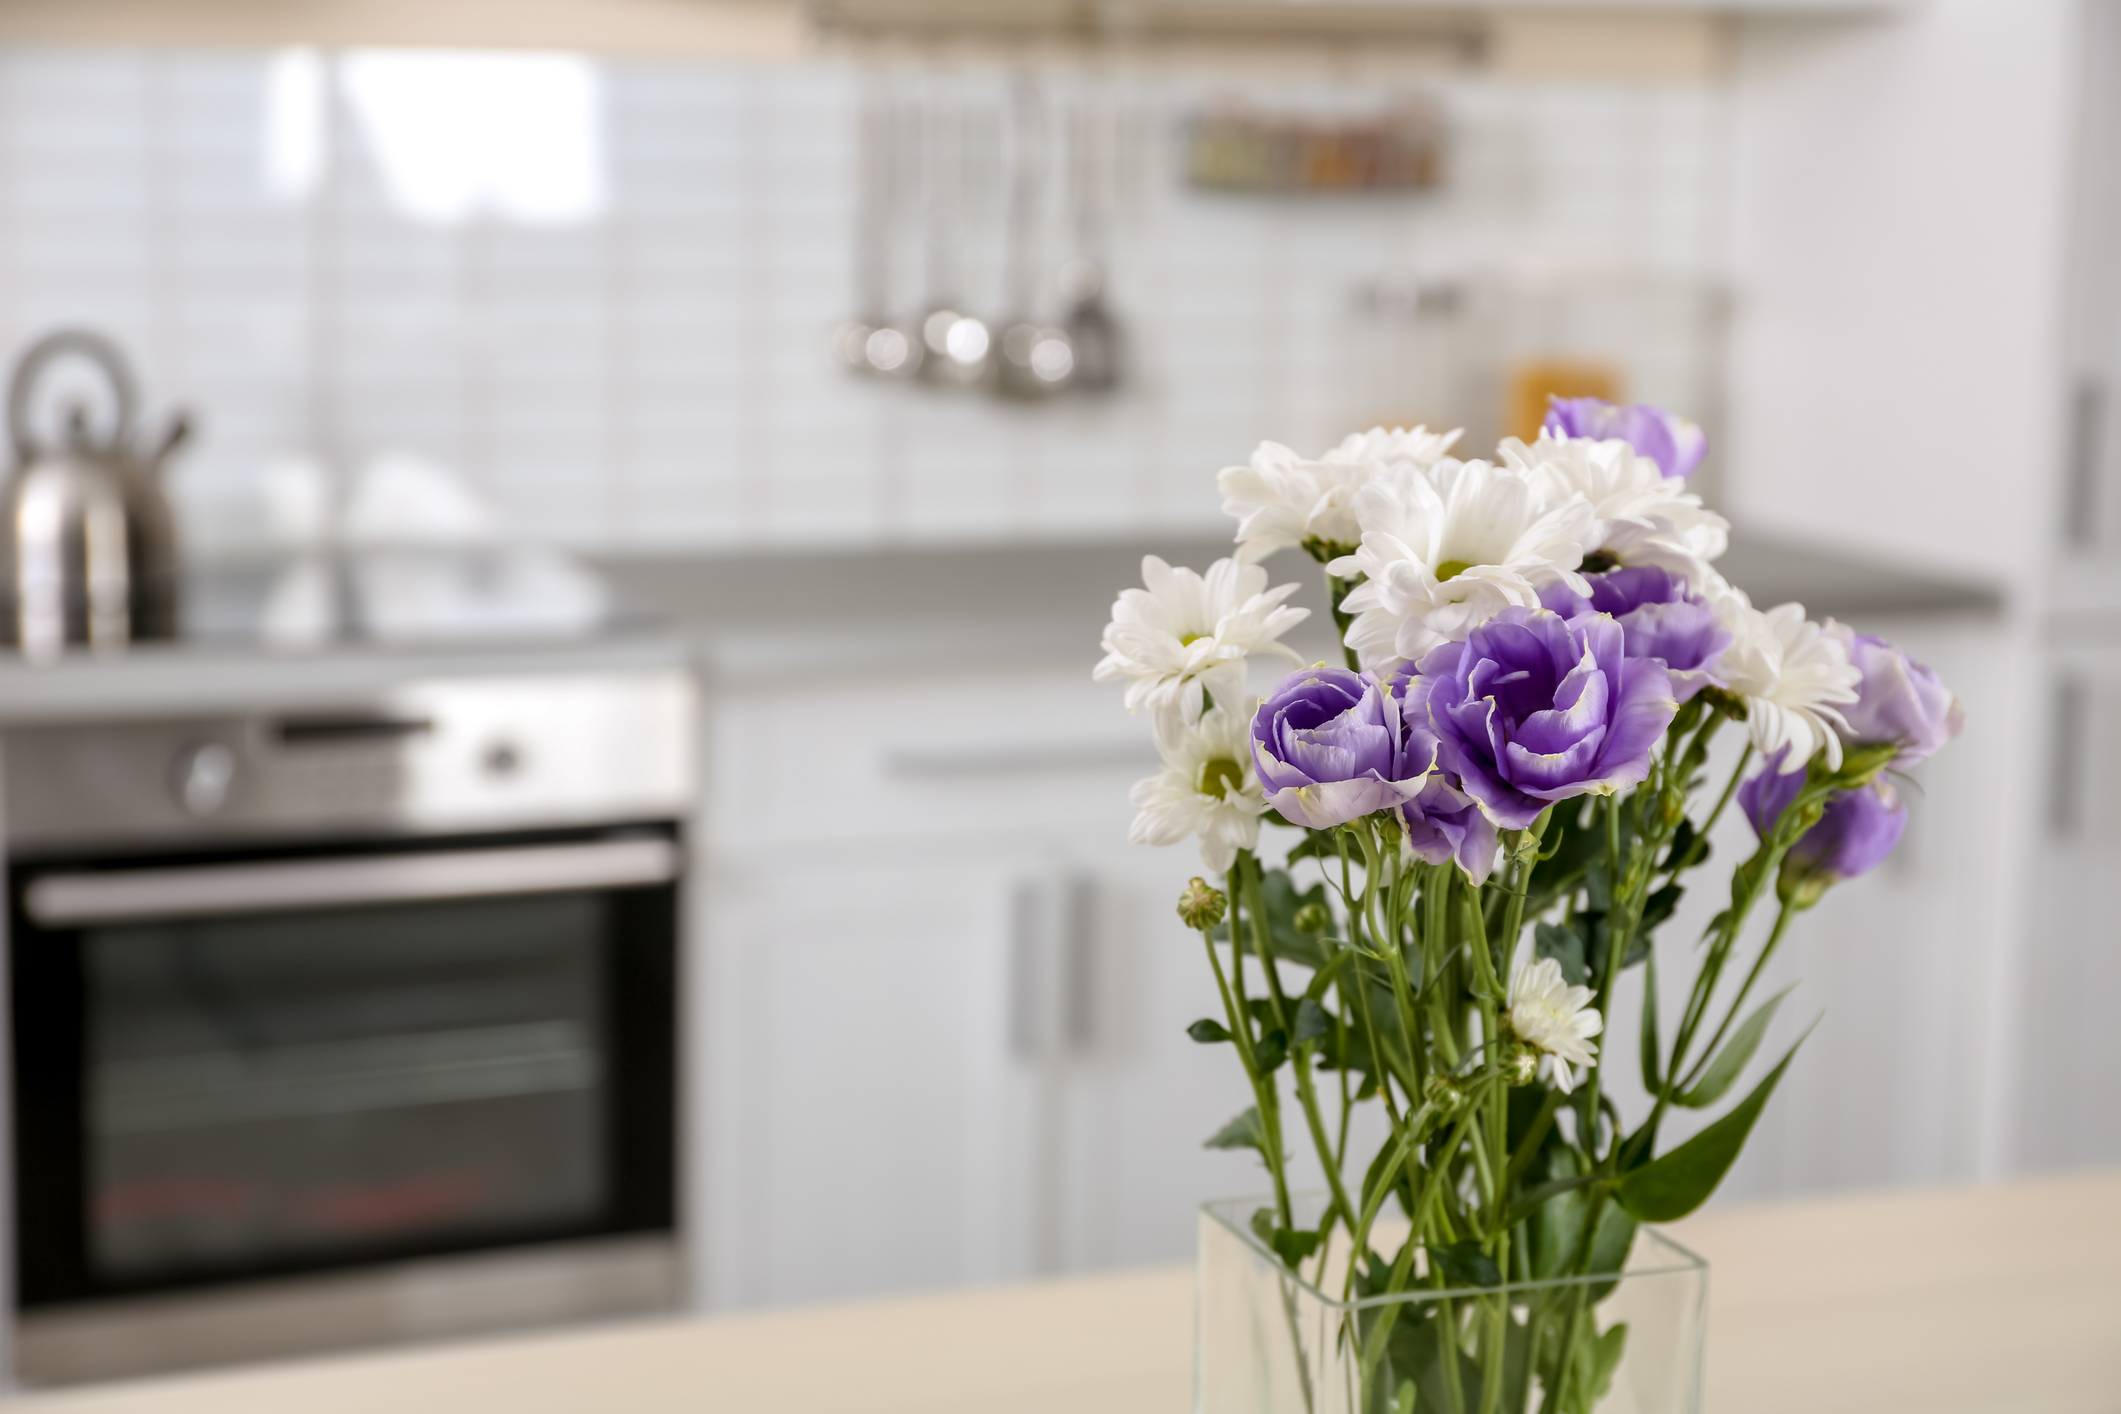 Brighten Up Your Home With These Spring Décor Tips